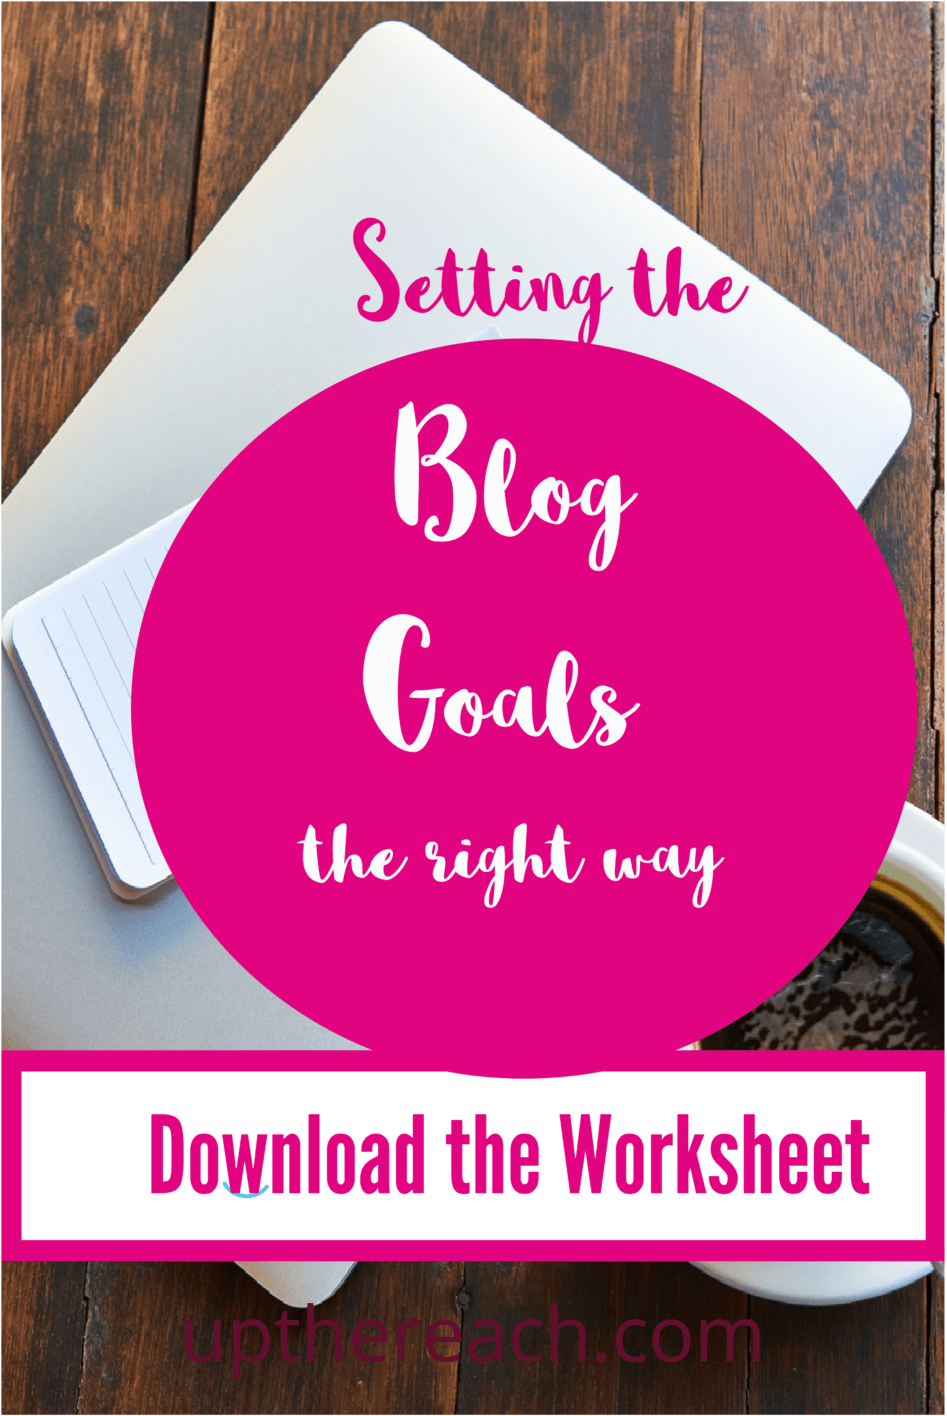 How to Set Blog Goals the Right Way- Goal Setting Worksheet Included - Content Marketing Blog & Services